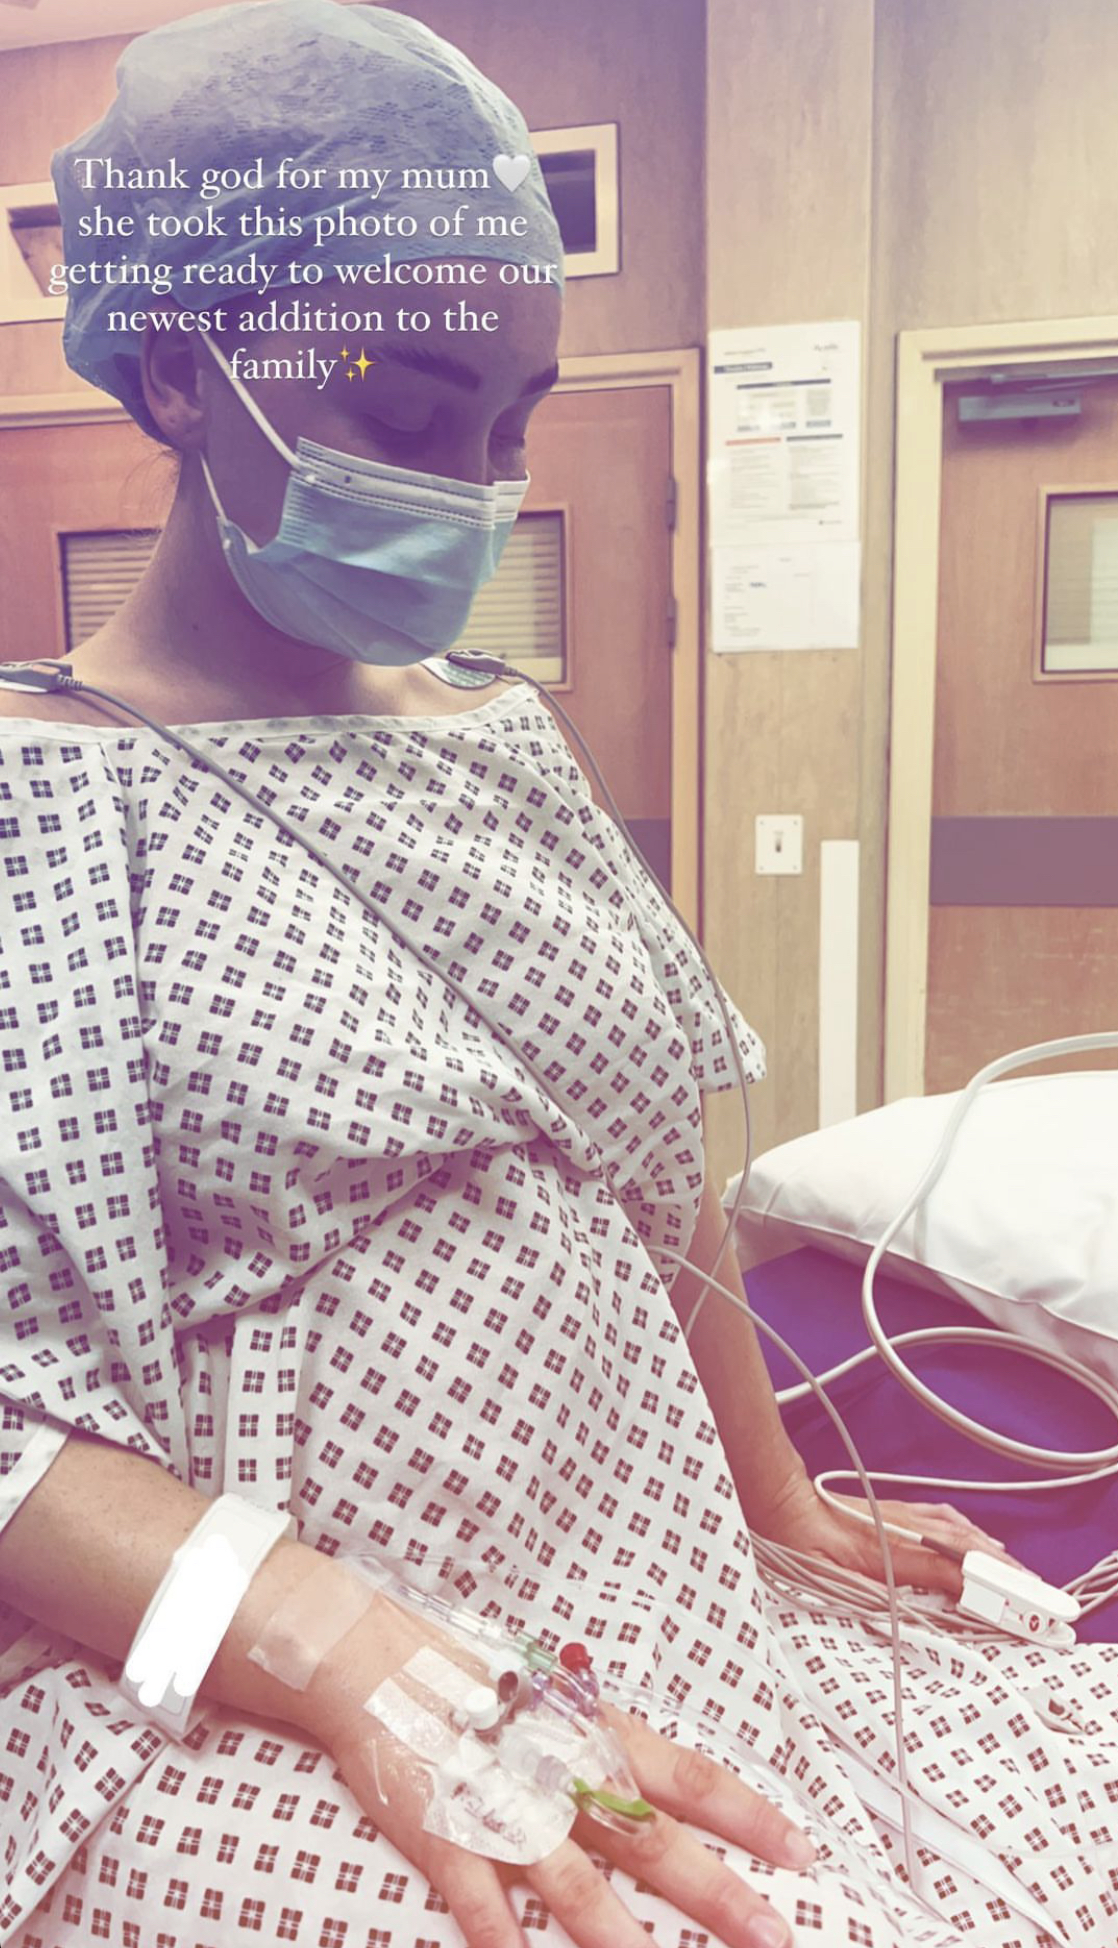 Ex On The Beach star gives birth to third baby after being ‘struck down with illness’